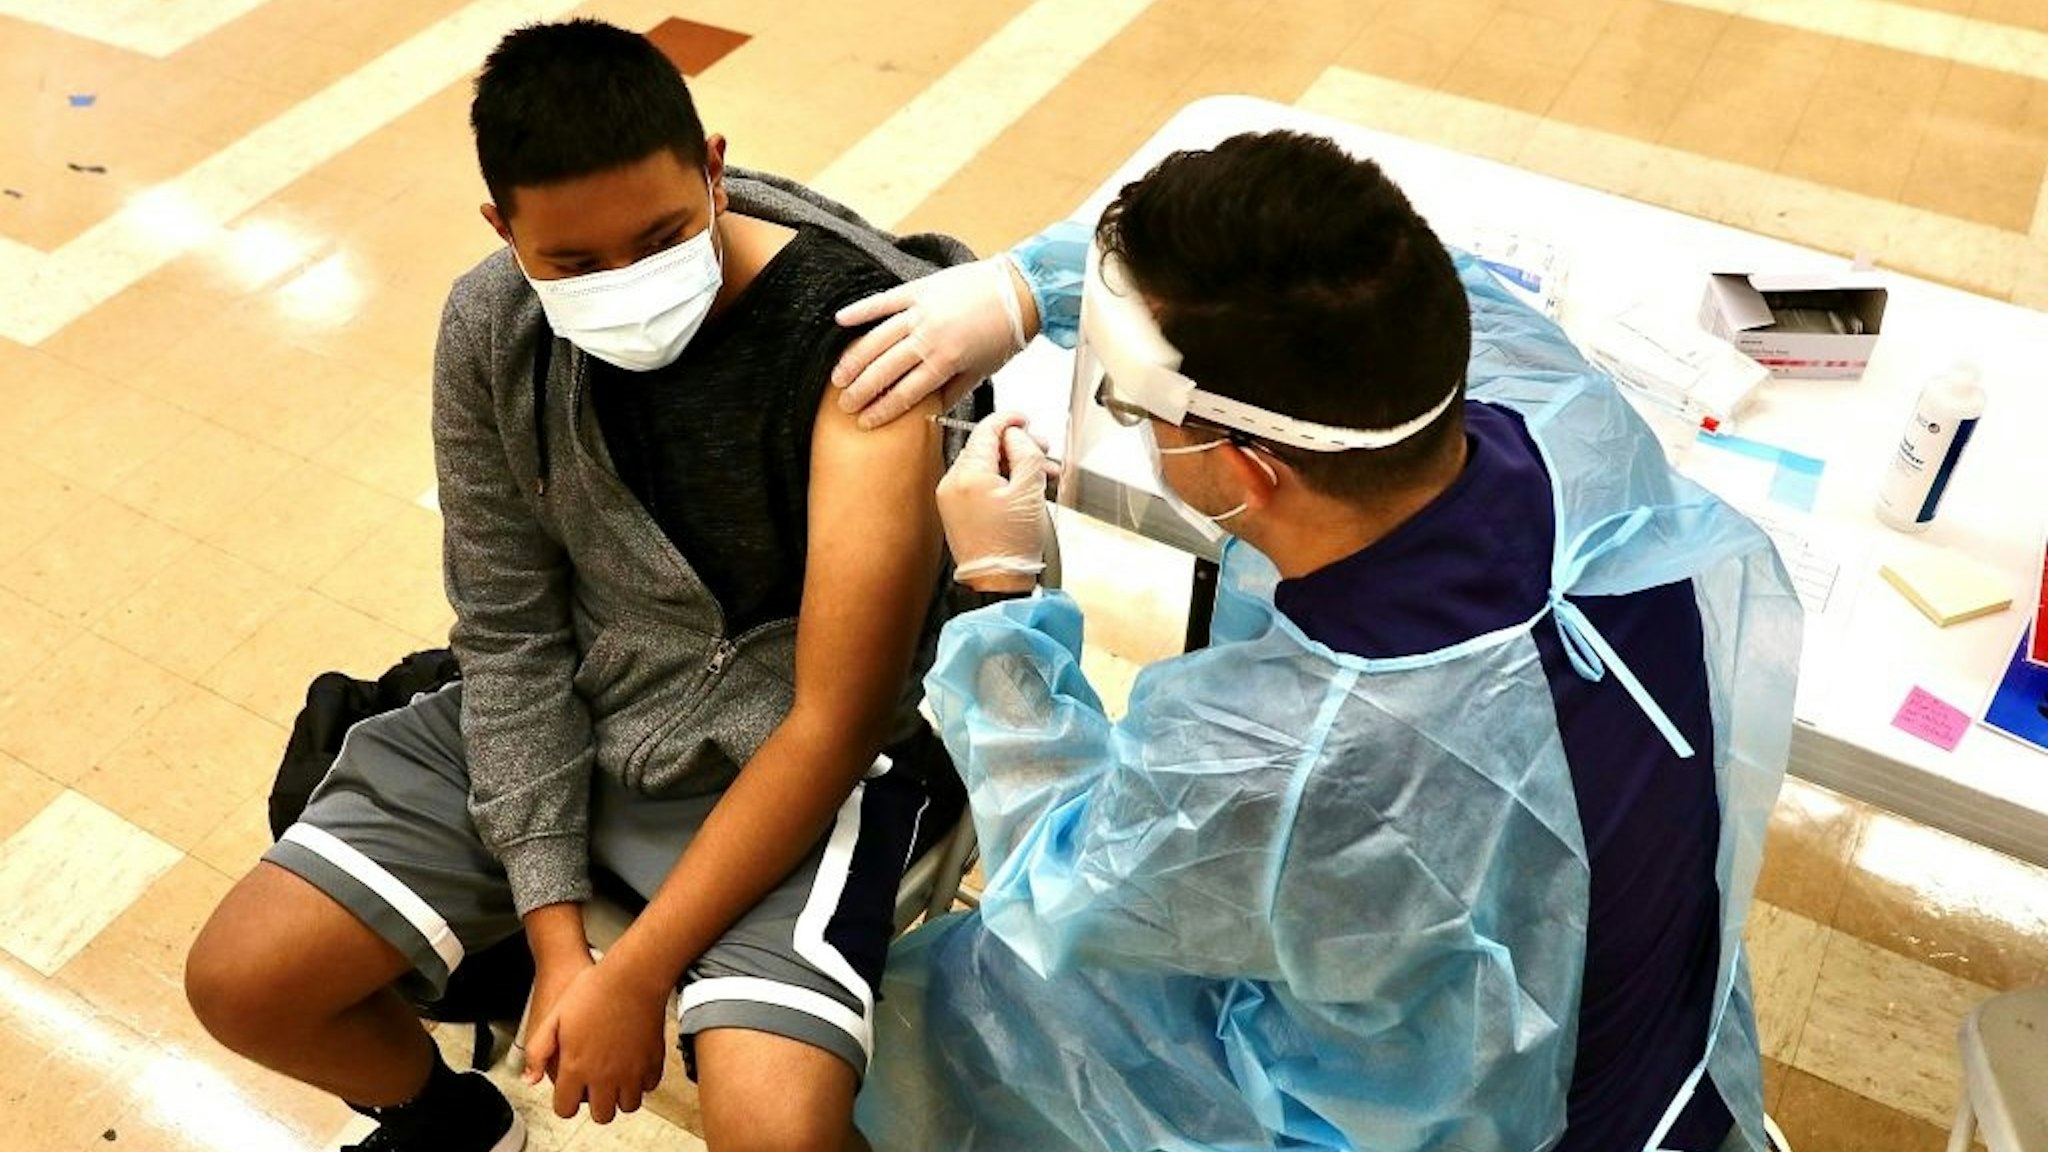 A student receives a dose of the COVID-19 vaccine at the Woodrow Wilson Senior High School in Los Angeles, California, the United States, on Aug. 30, 2021.